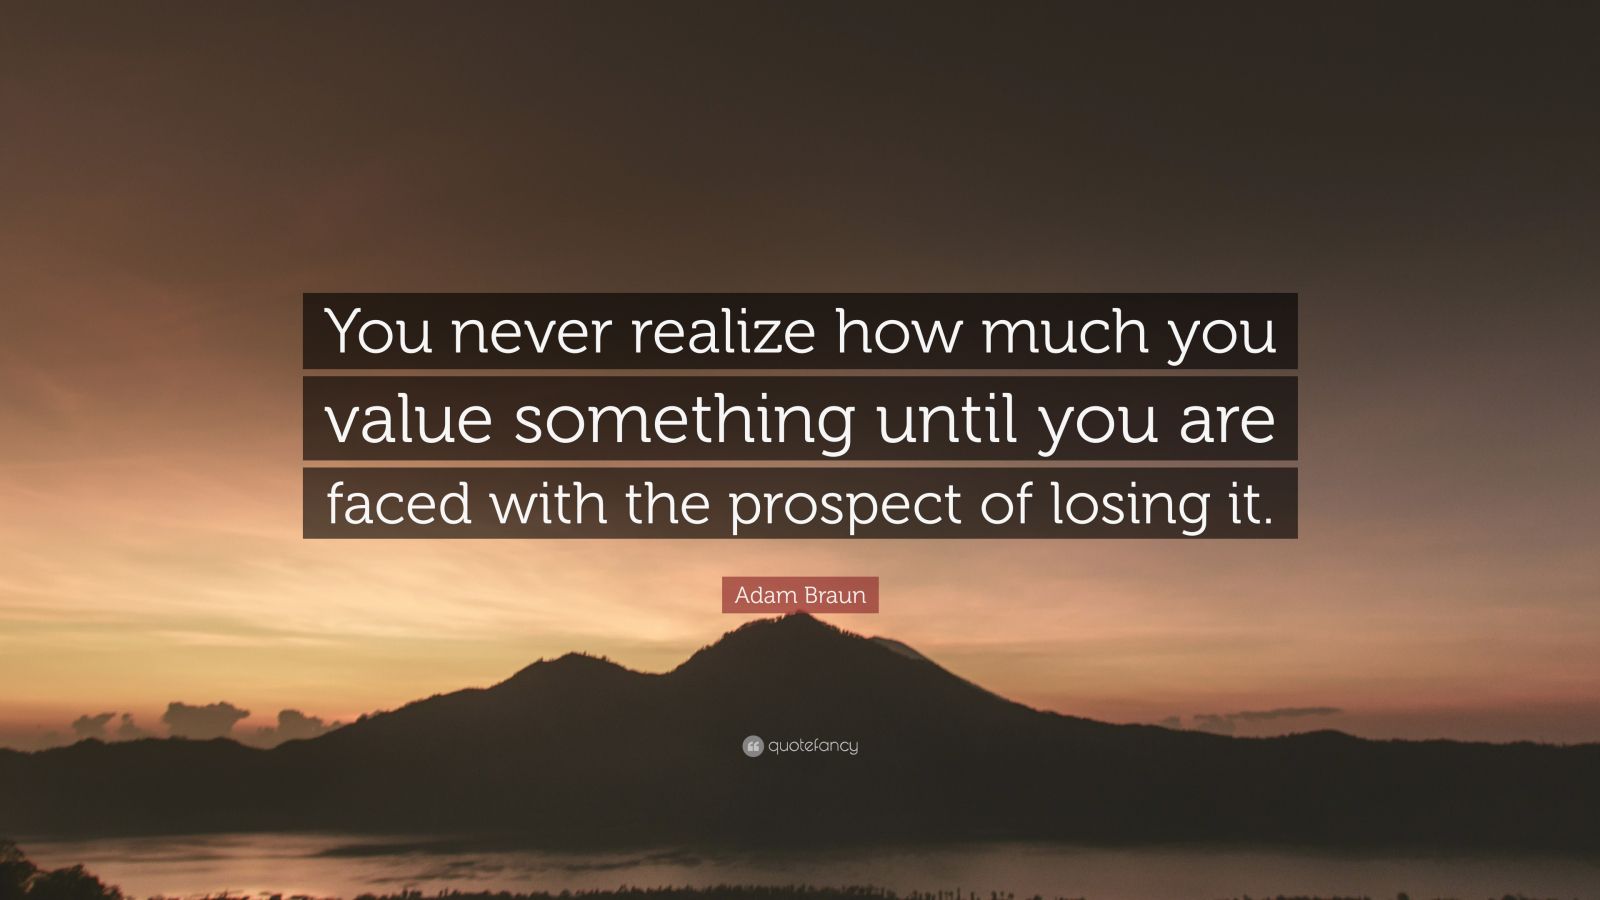 Adam Braun Quote “you Never Realize How Much You Value Something Until You Are Faced With The